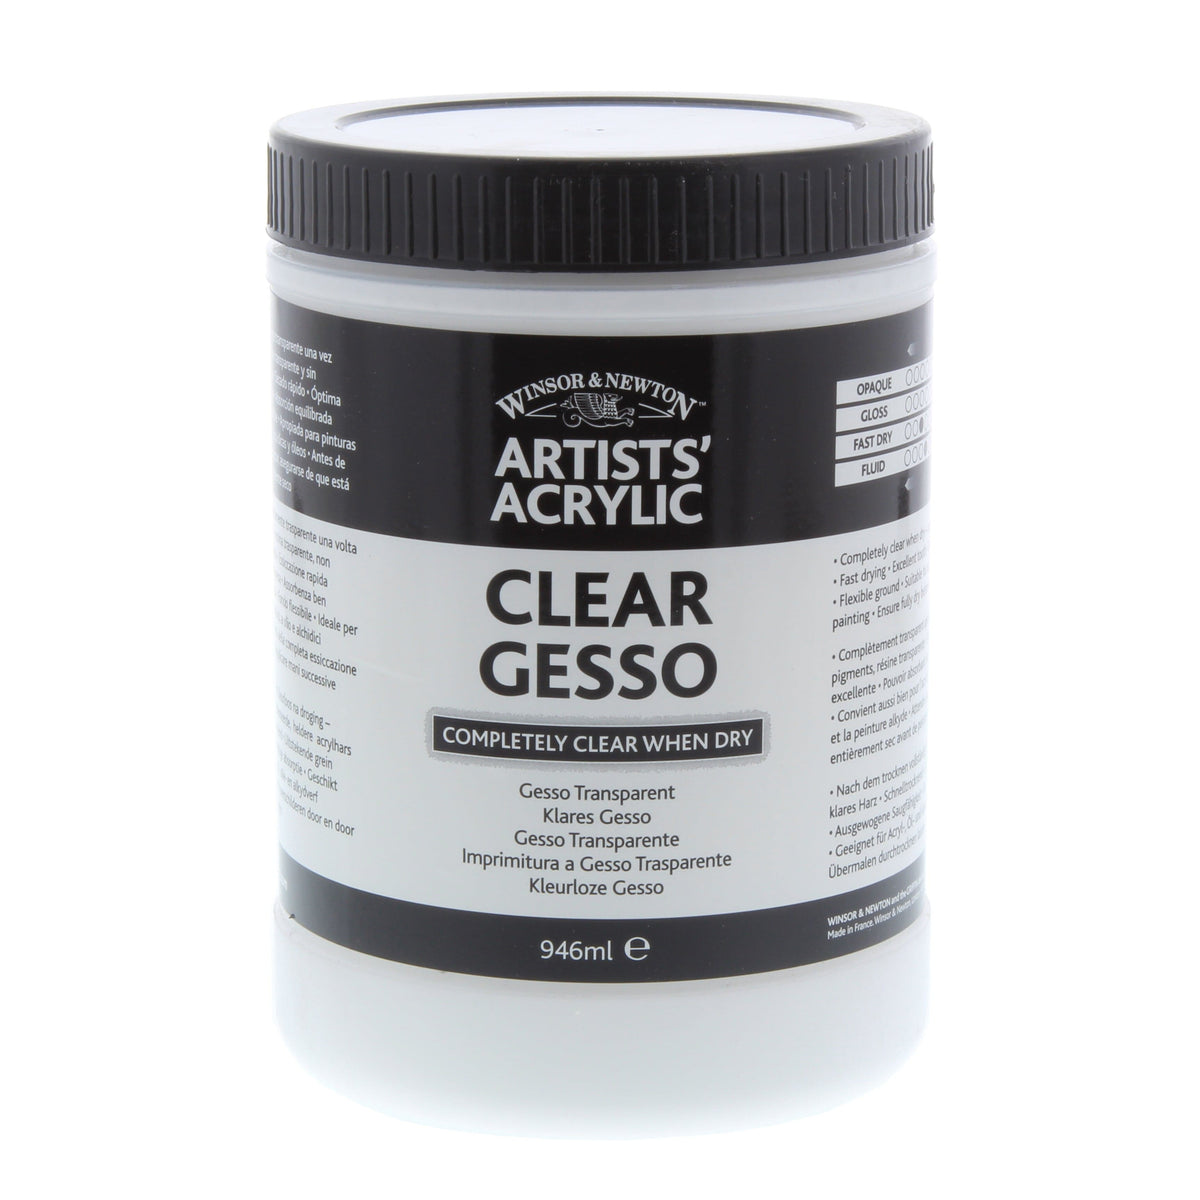 Artists' Acrylic Clear Gesso